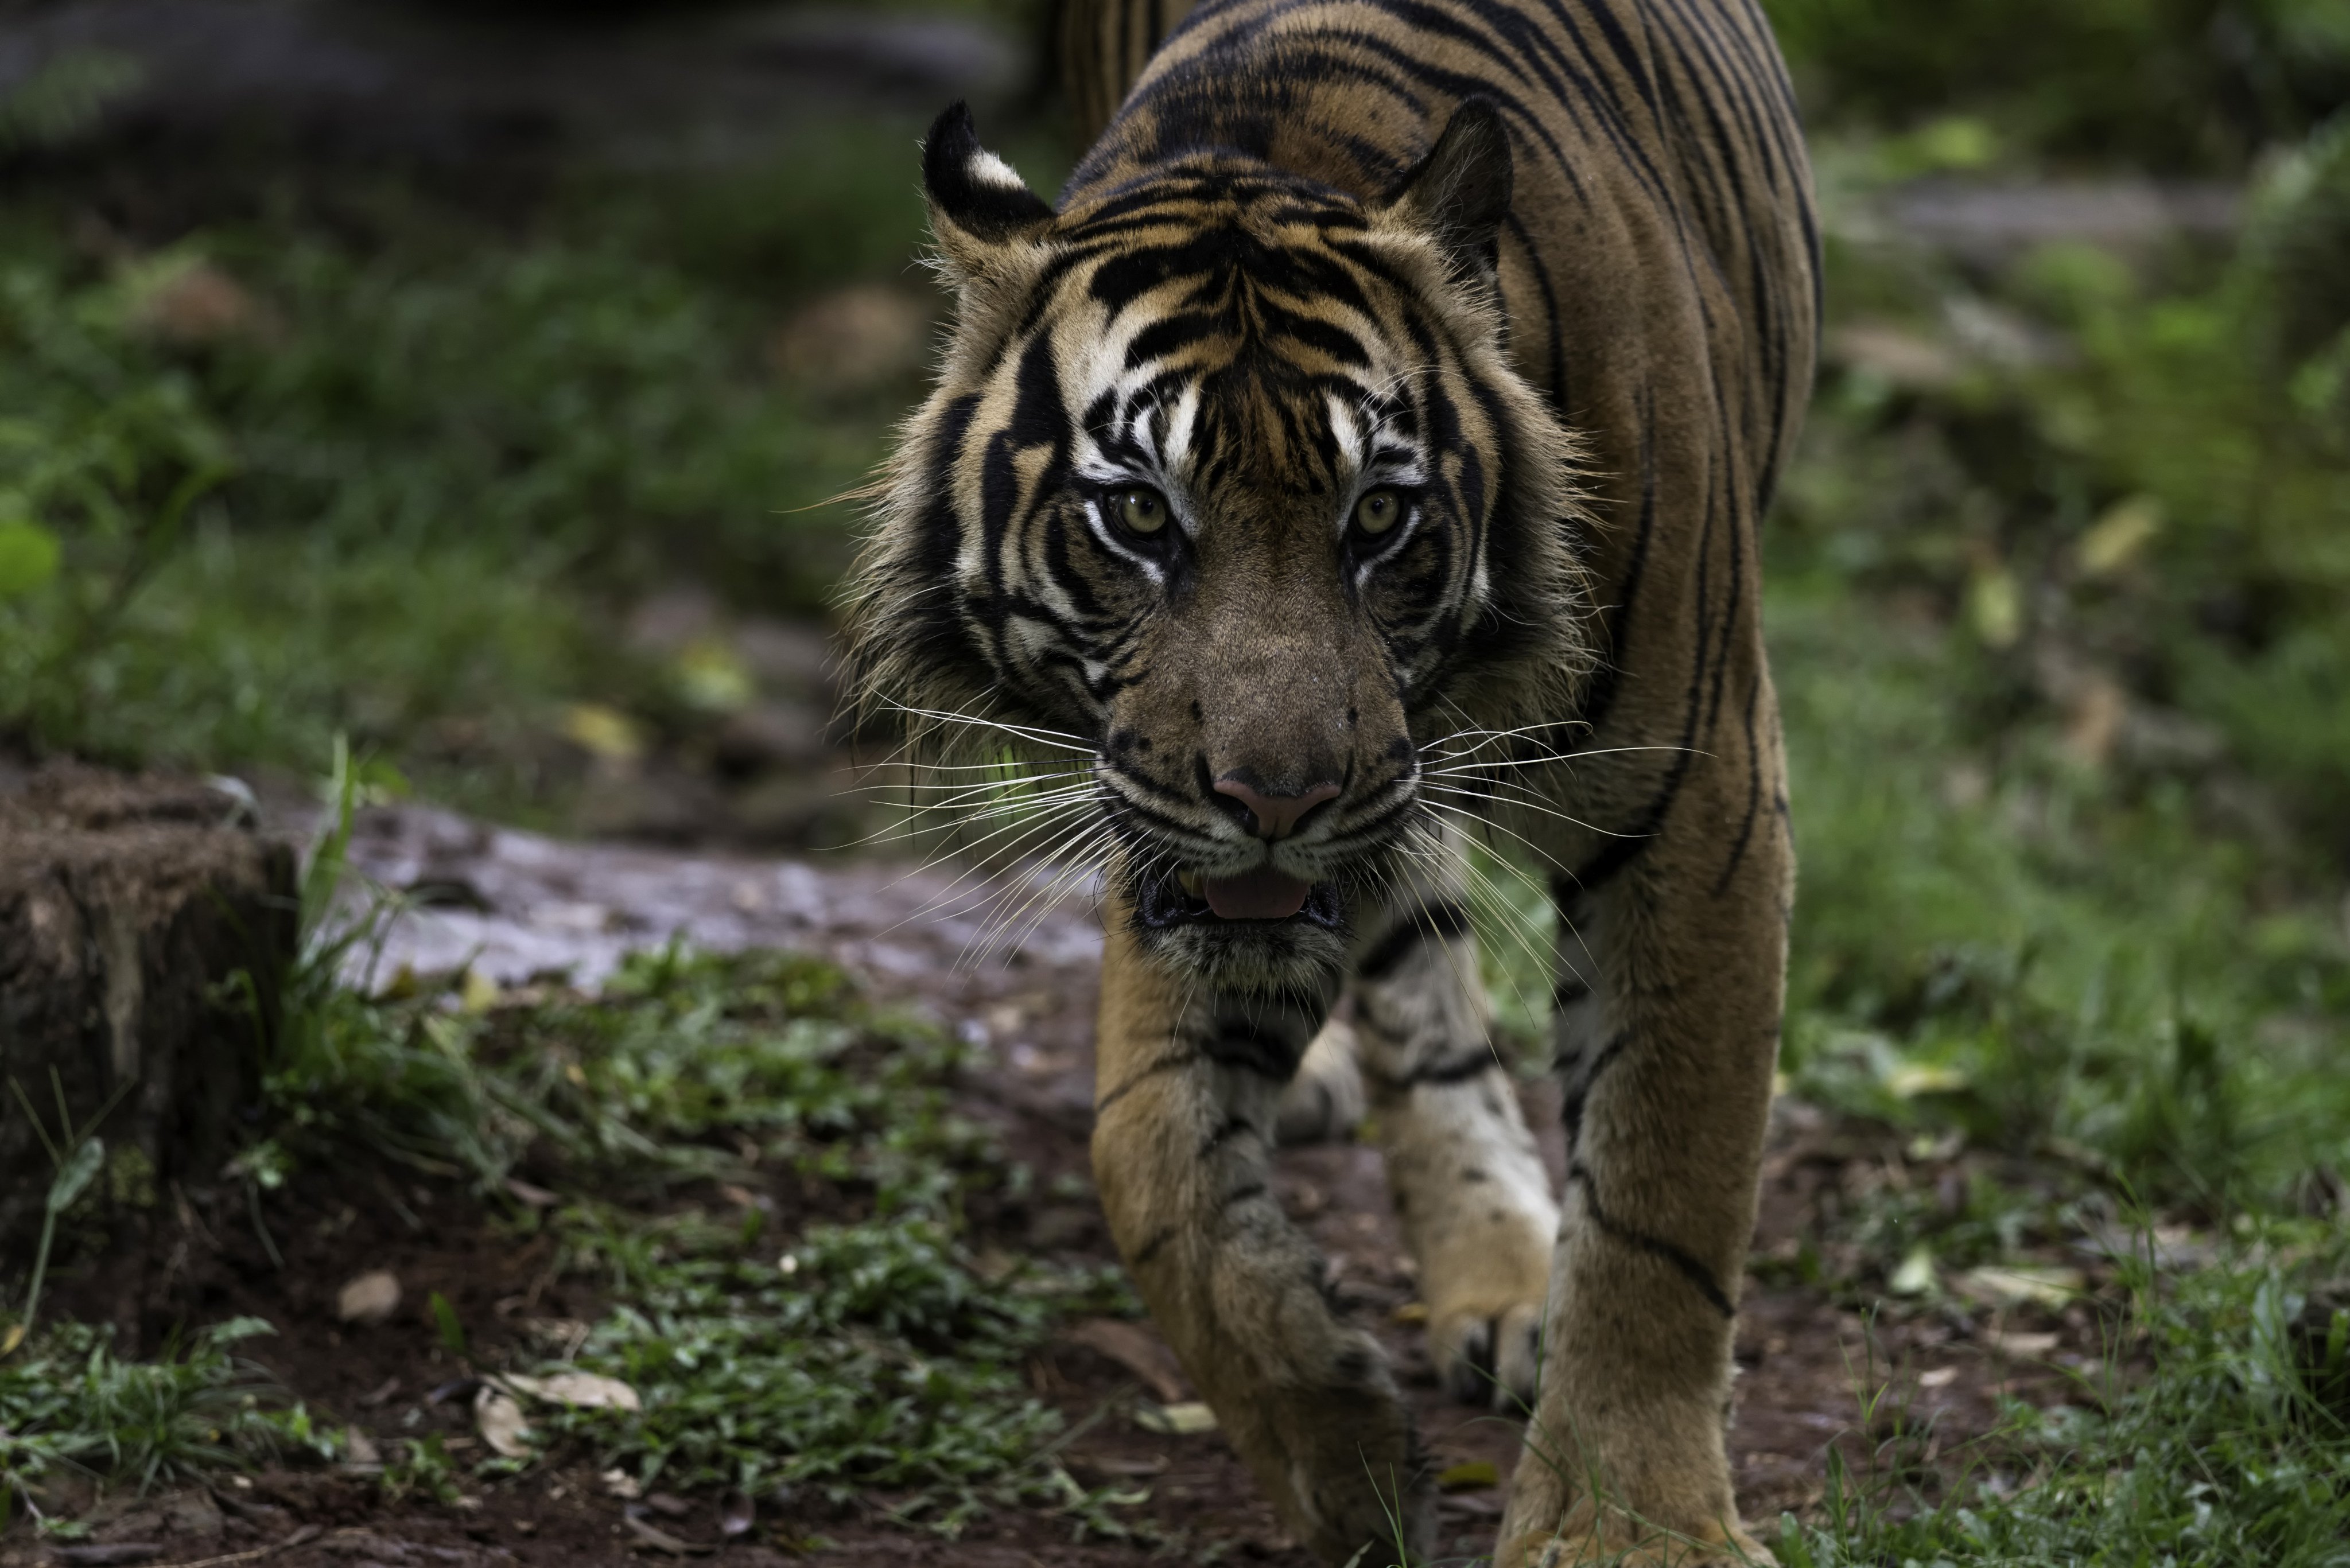 A Sumatran tiger. The big cats, a critically endangered species, are often targeted by poachers for their body parts. Photo: Shutterstock